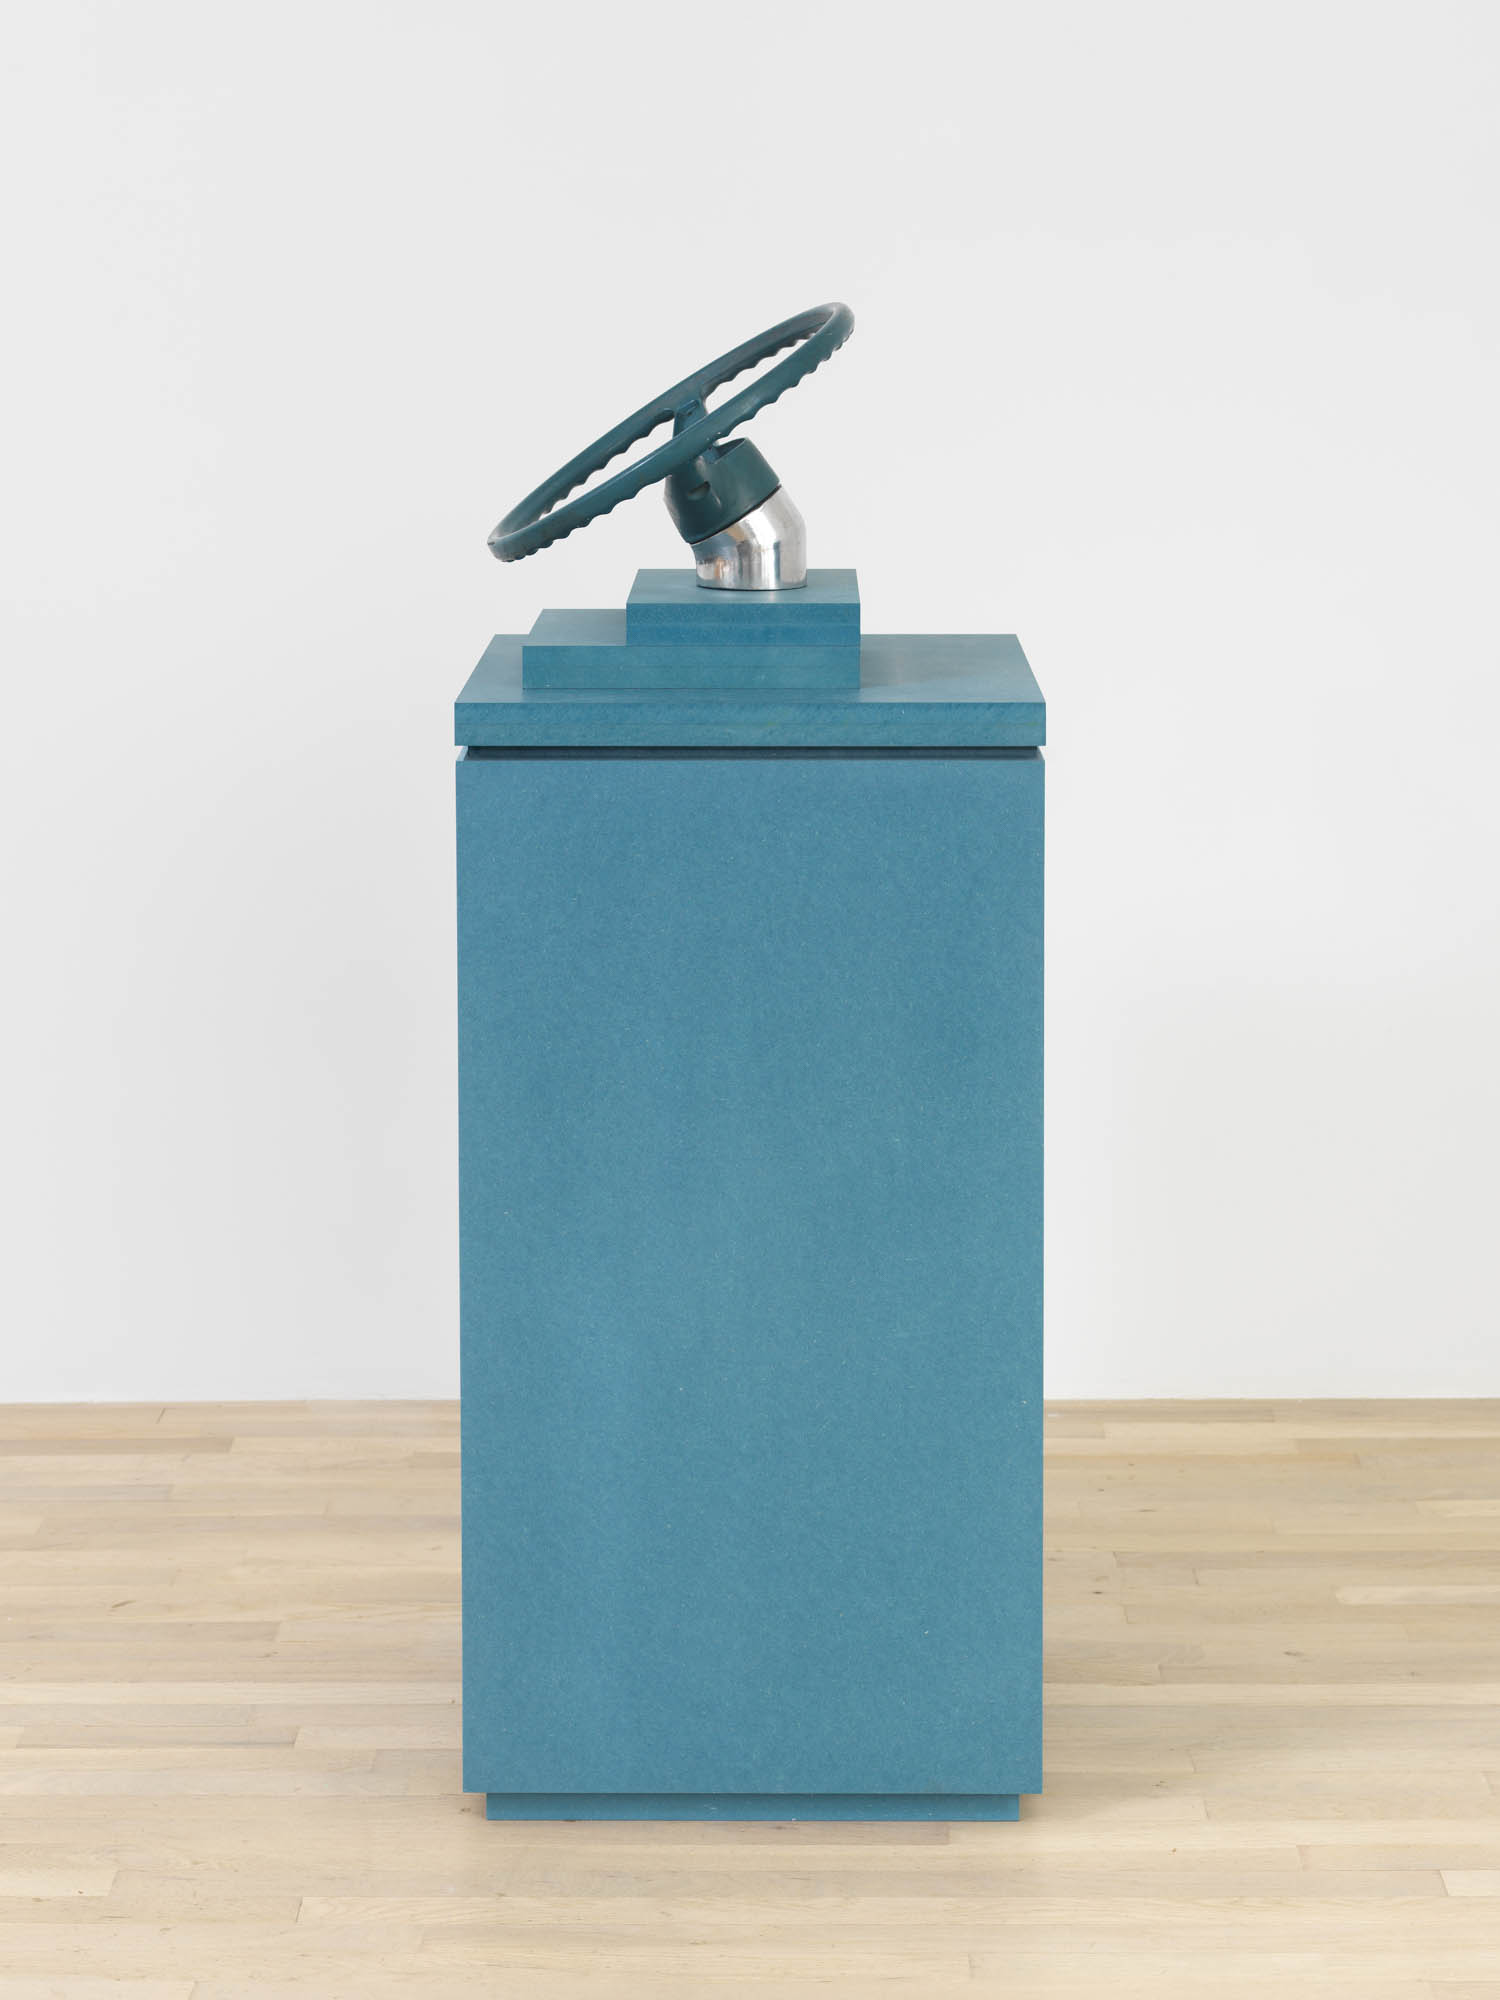 Jennifer Bolande, Circling Around, 2023, Steering wheel, blue pigmented high-density composite plinth and base, 52 1/4 x 20 x 20 in.